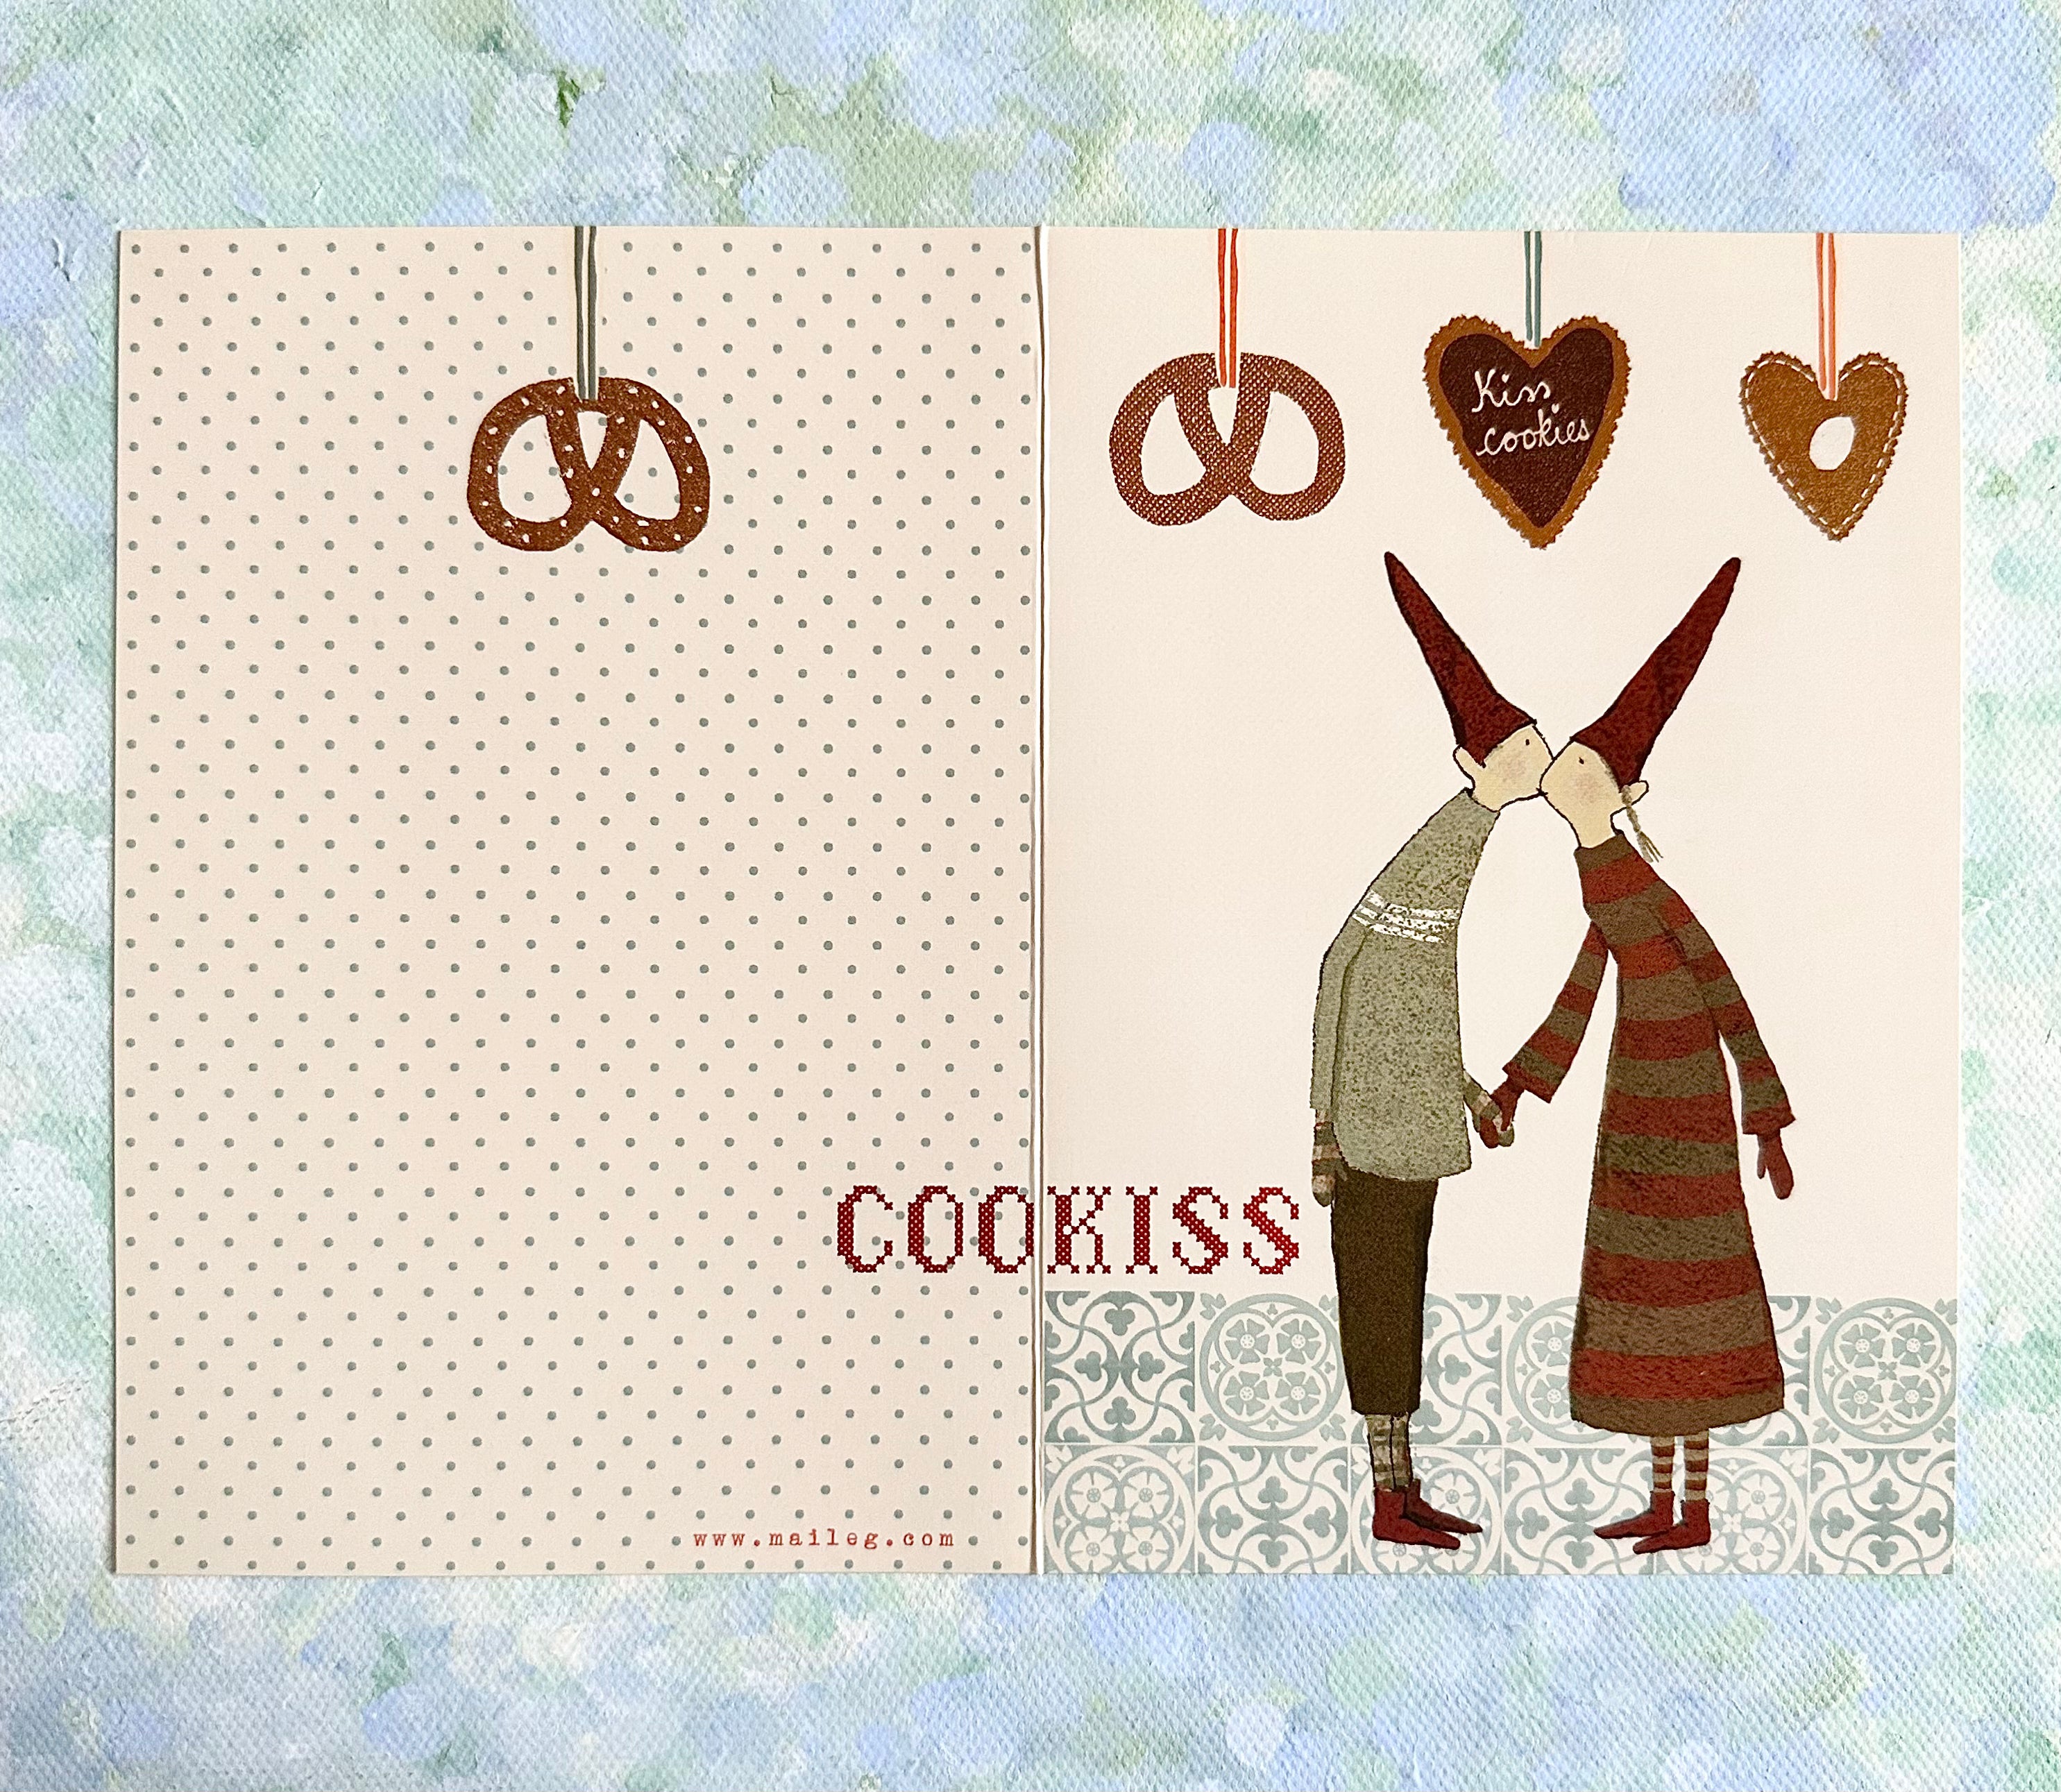 Double Christmas Card “CooKiss” - 2007